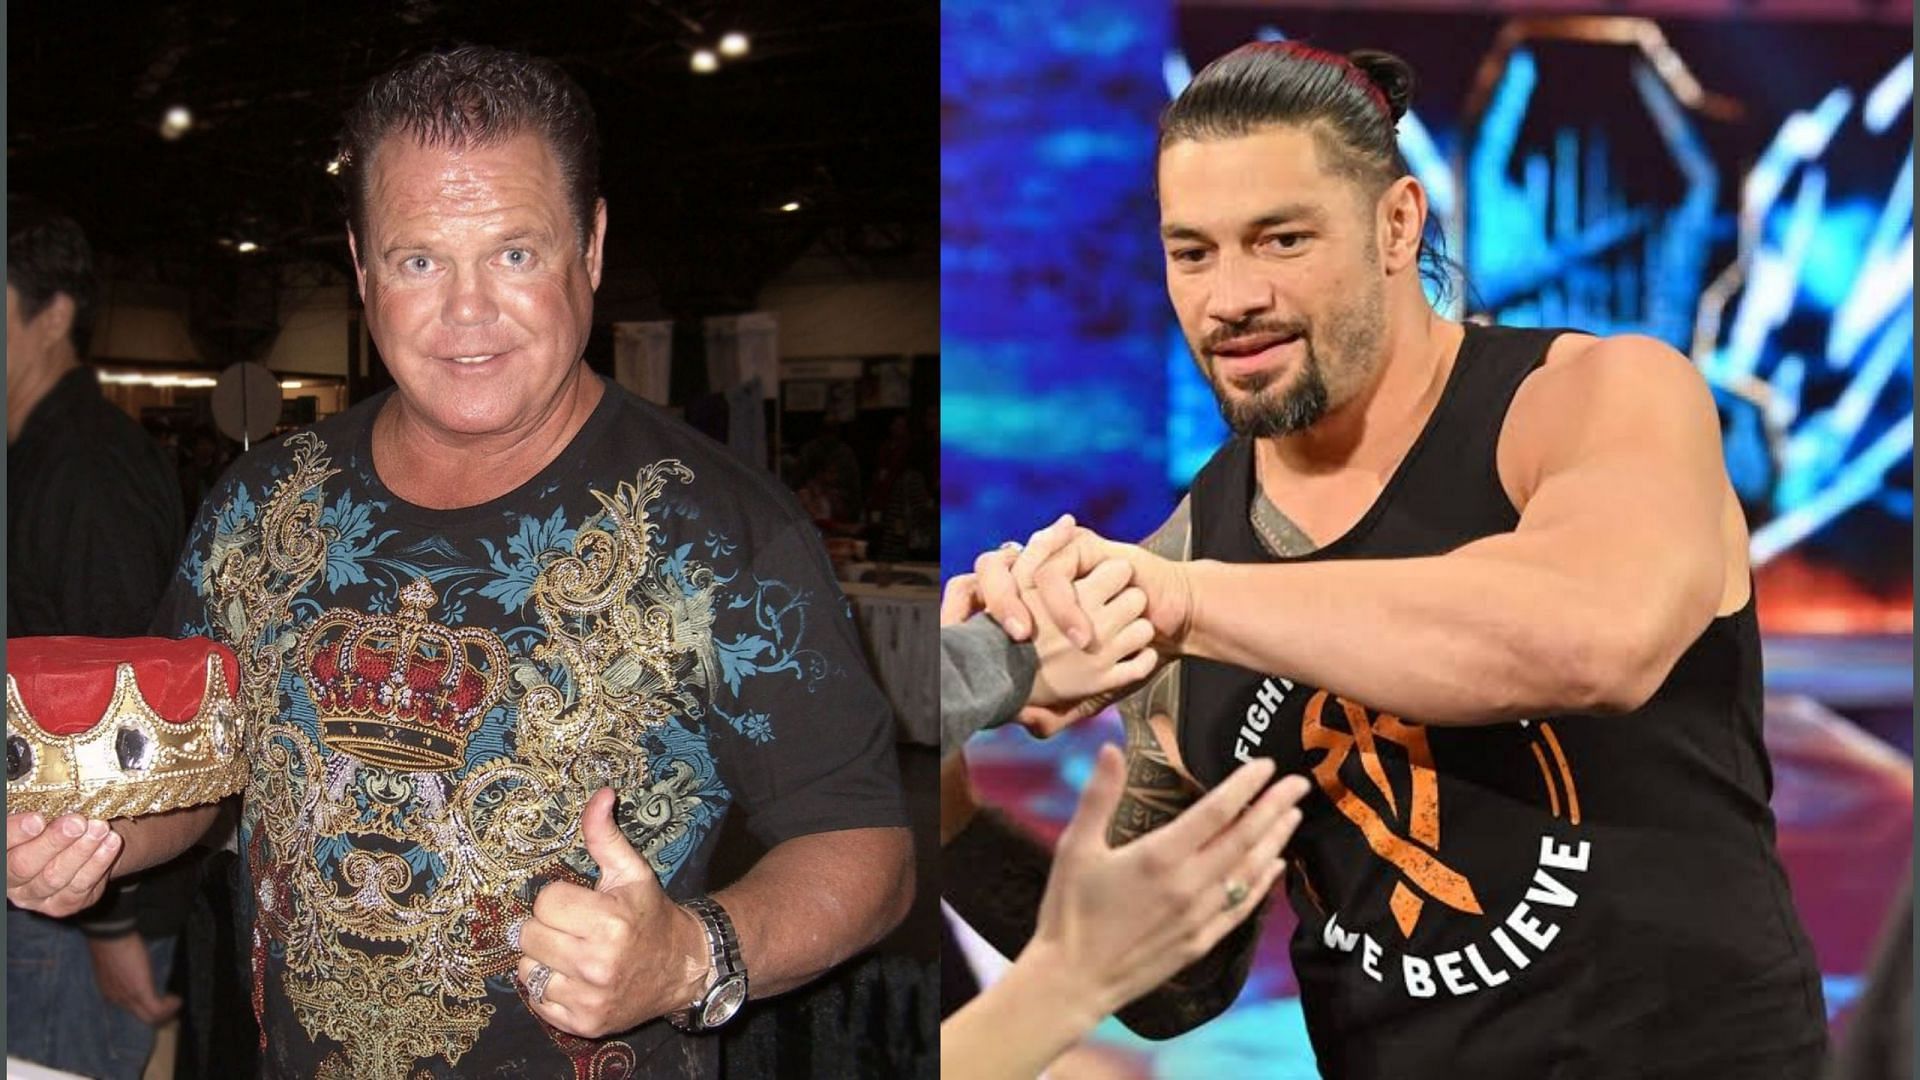 WATCH WWE Wrestlers who survived real-life tragedies